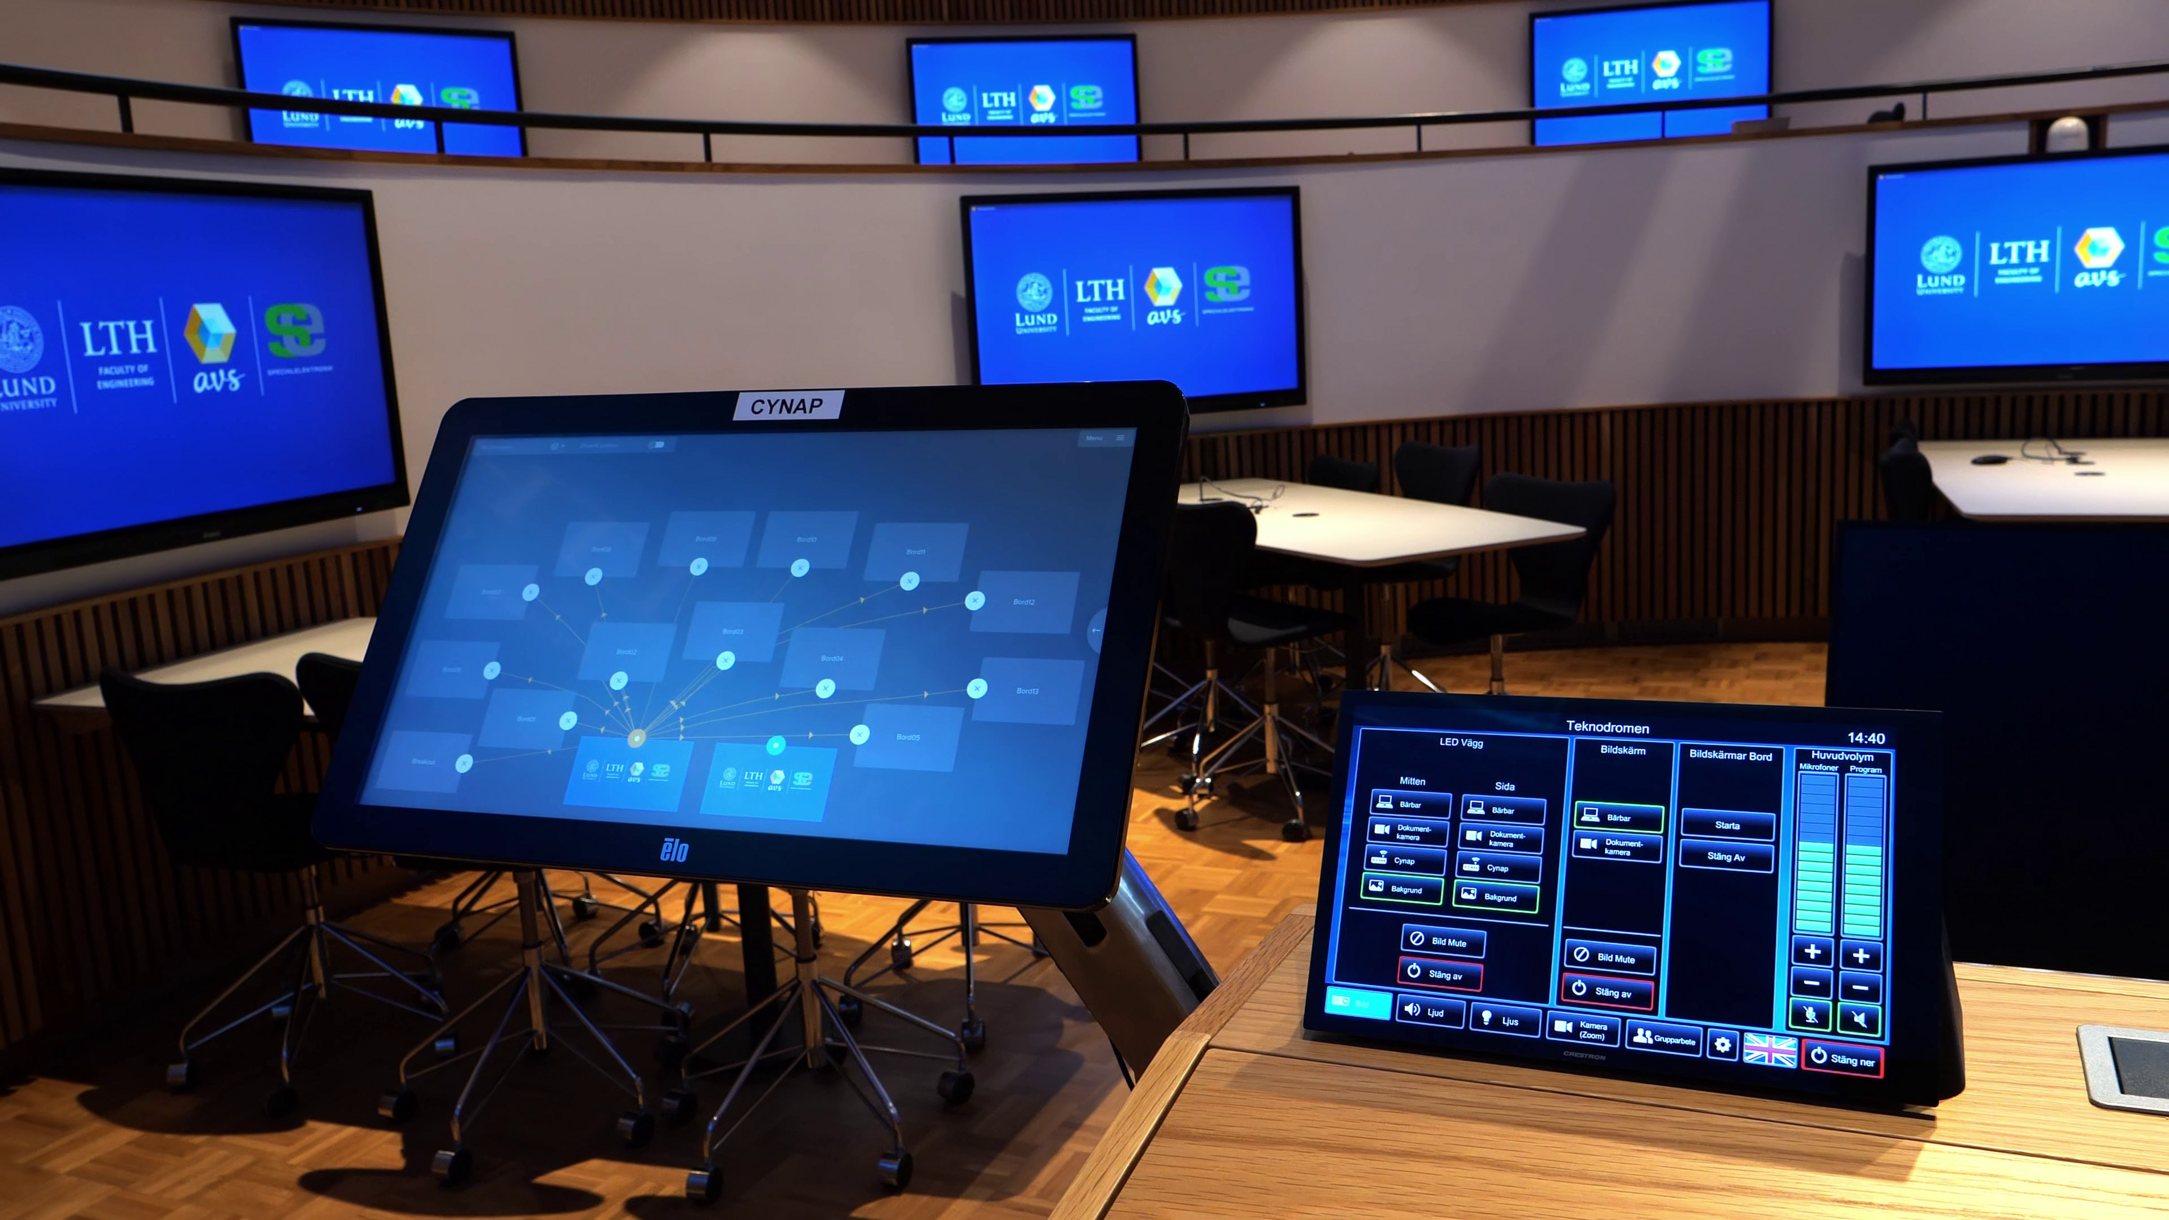 The touchscreen 'Room View' enables easy 'drag and drop' control of all displayed content materials.